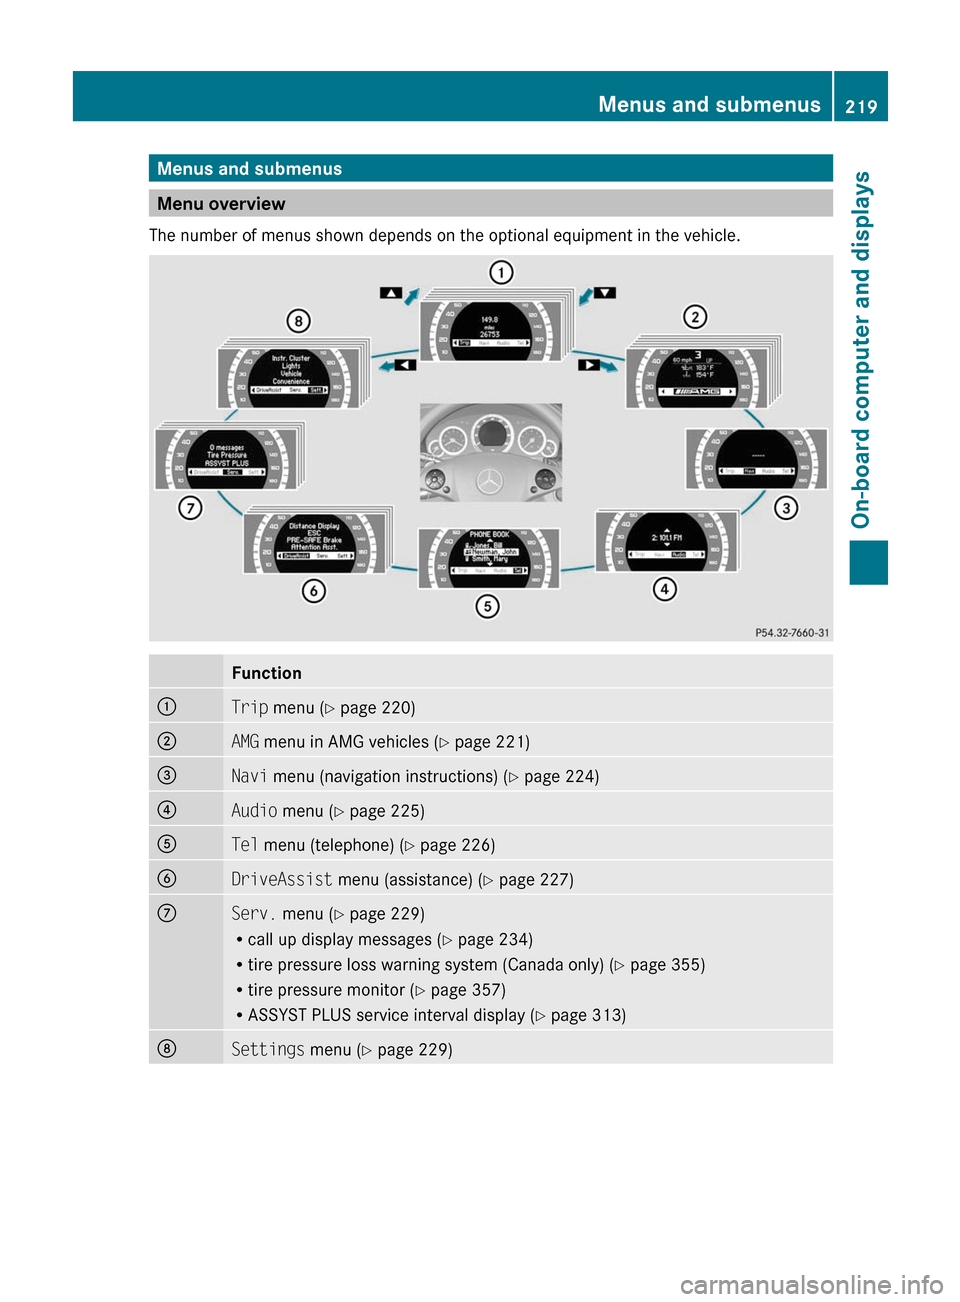 MERCEDES-BENZ E350 4MATIC 2011 W212 User Guide Menus and submenus
Menu overview
The number of menus shown depends on the optional equipment in the vehicle. 
Function:Trip  menu ( Y page 220);AMG  menu in AMG vehicles ( Y page 221)=Navi  menu (navi